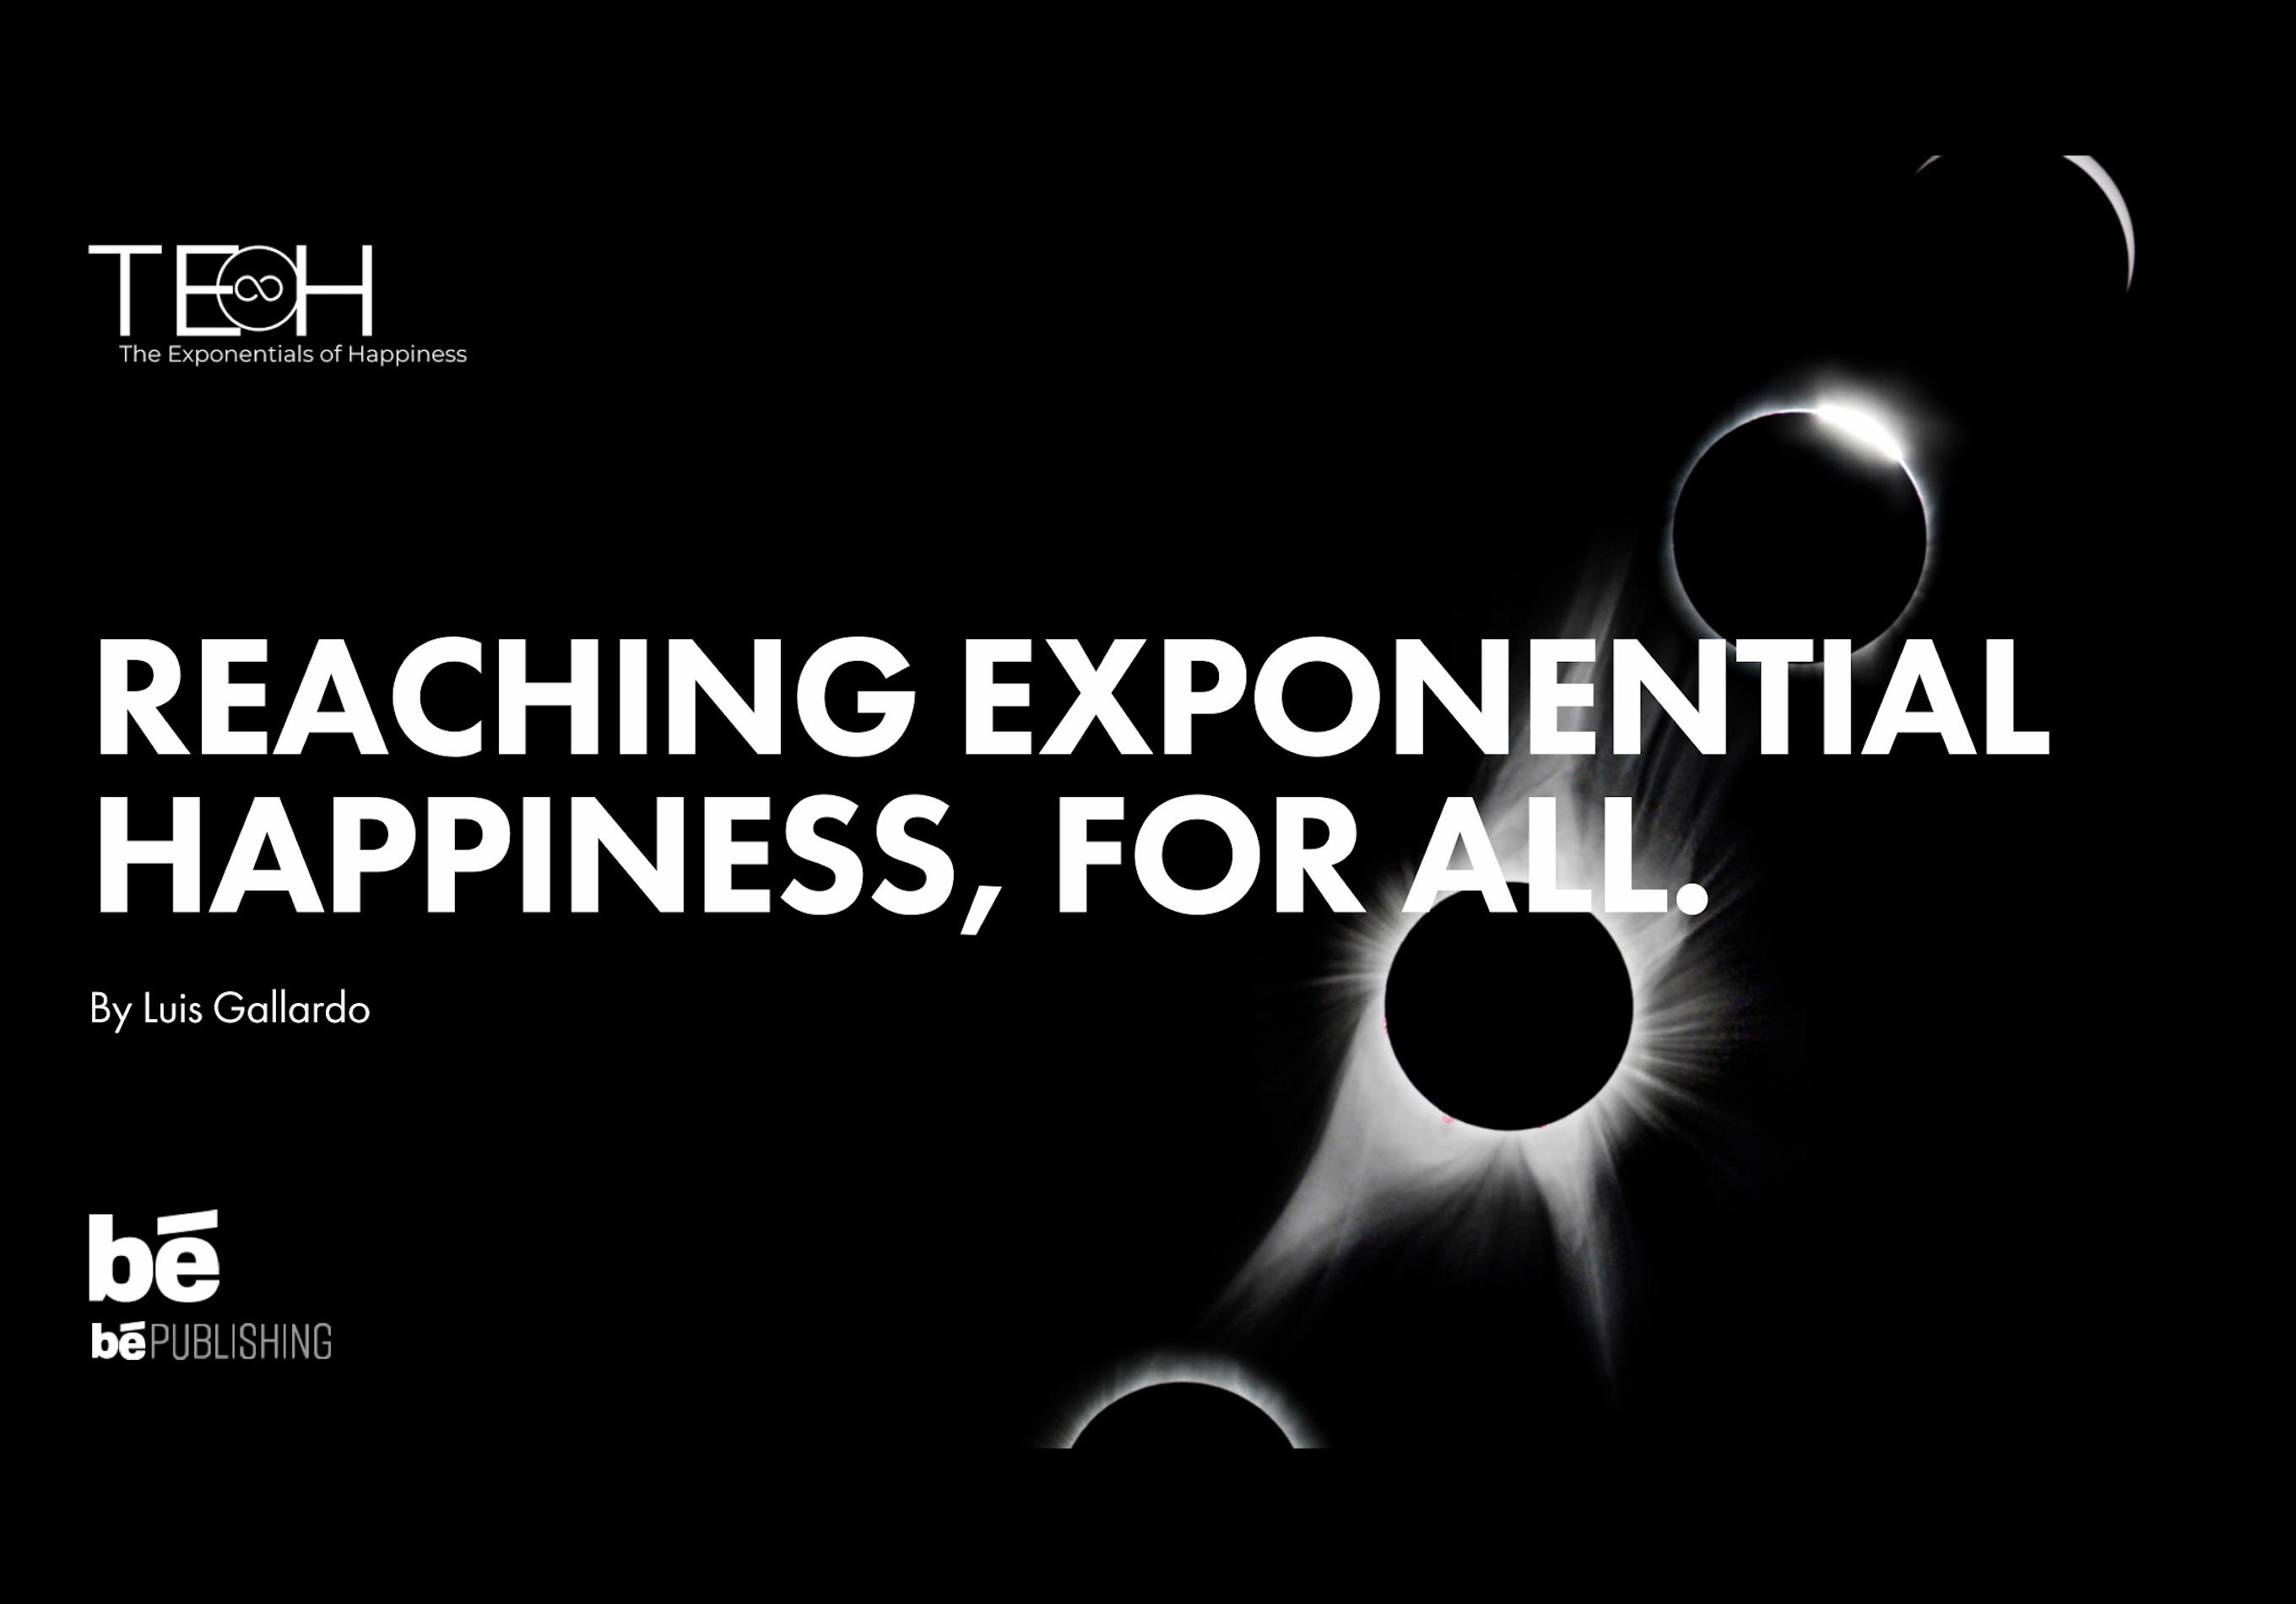 The Exponentials of Happiness by Luis Gallardo